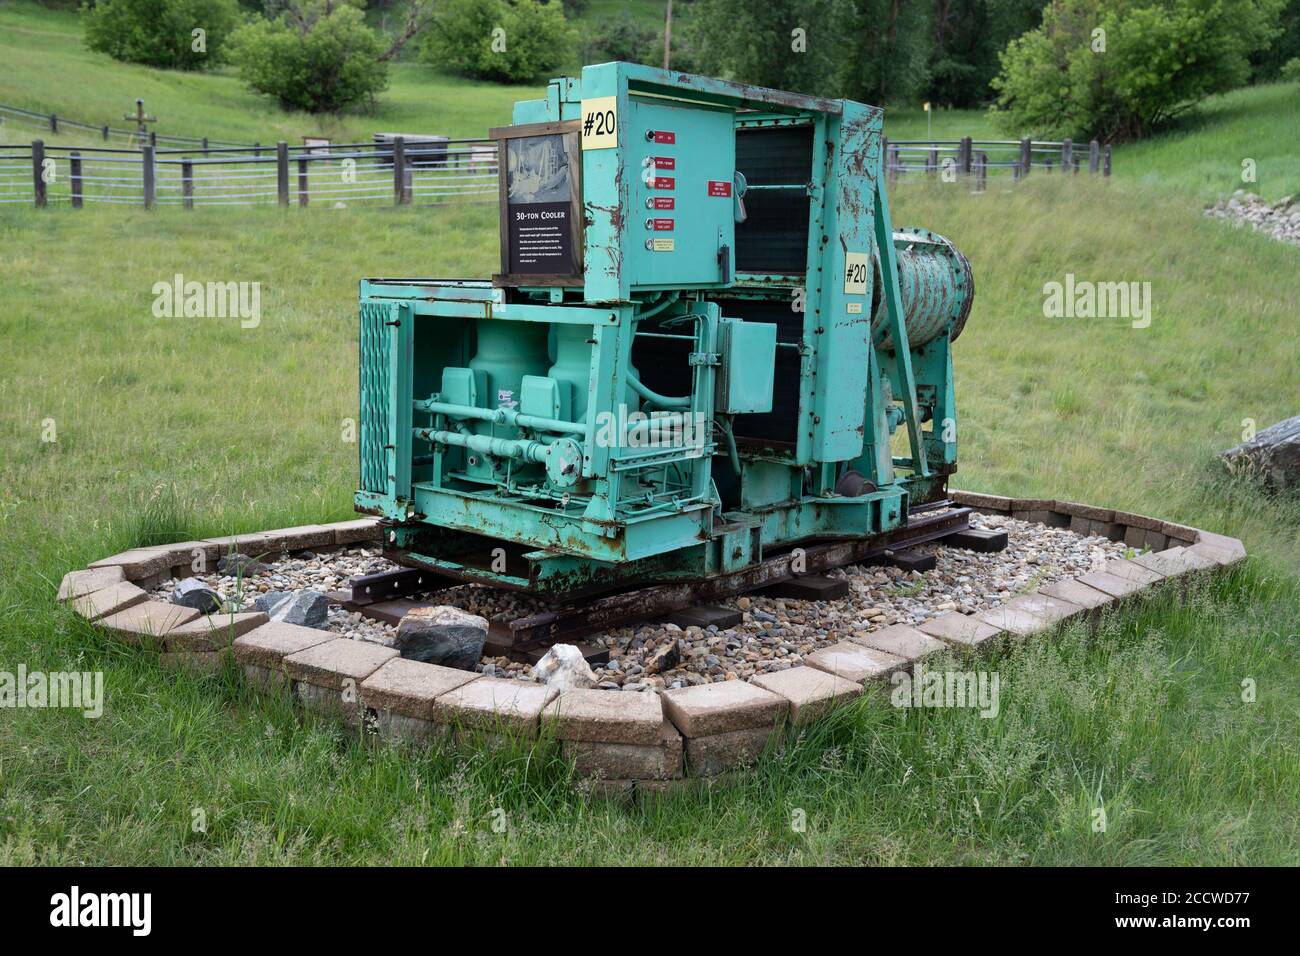 Lead, South Dakota - June 22, 2020: A 30-ton cooler equipment at Gold Run Park, a mining area of the Homestake Mine in the Black Hills of SD Stock Photo